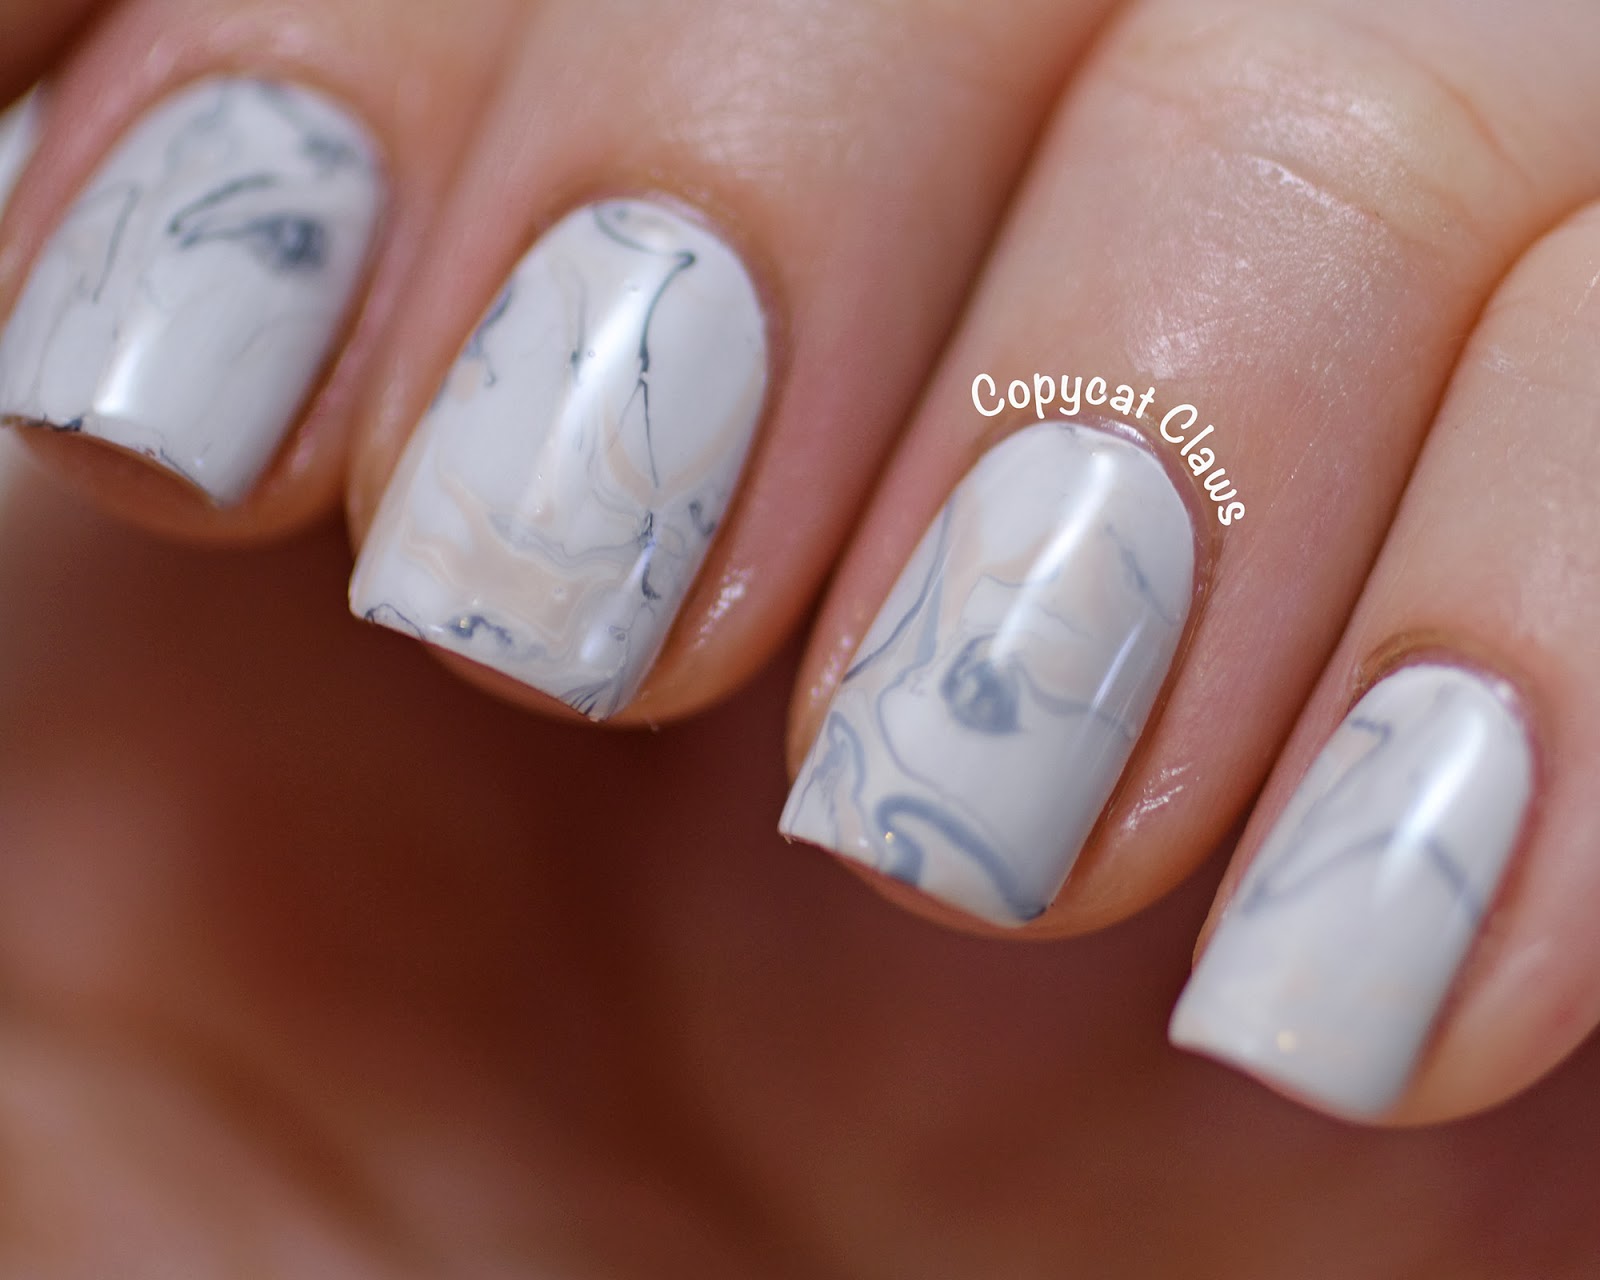 Marble Nail Art Tutorial Without Water - wide 6